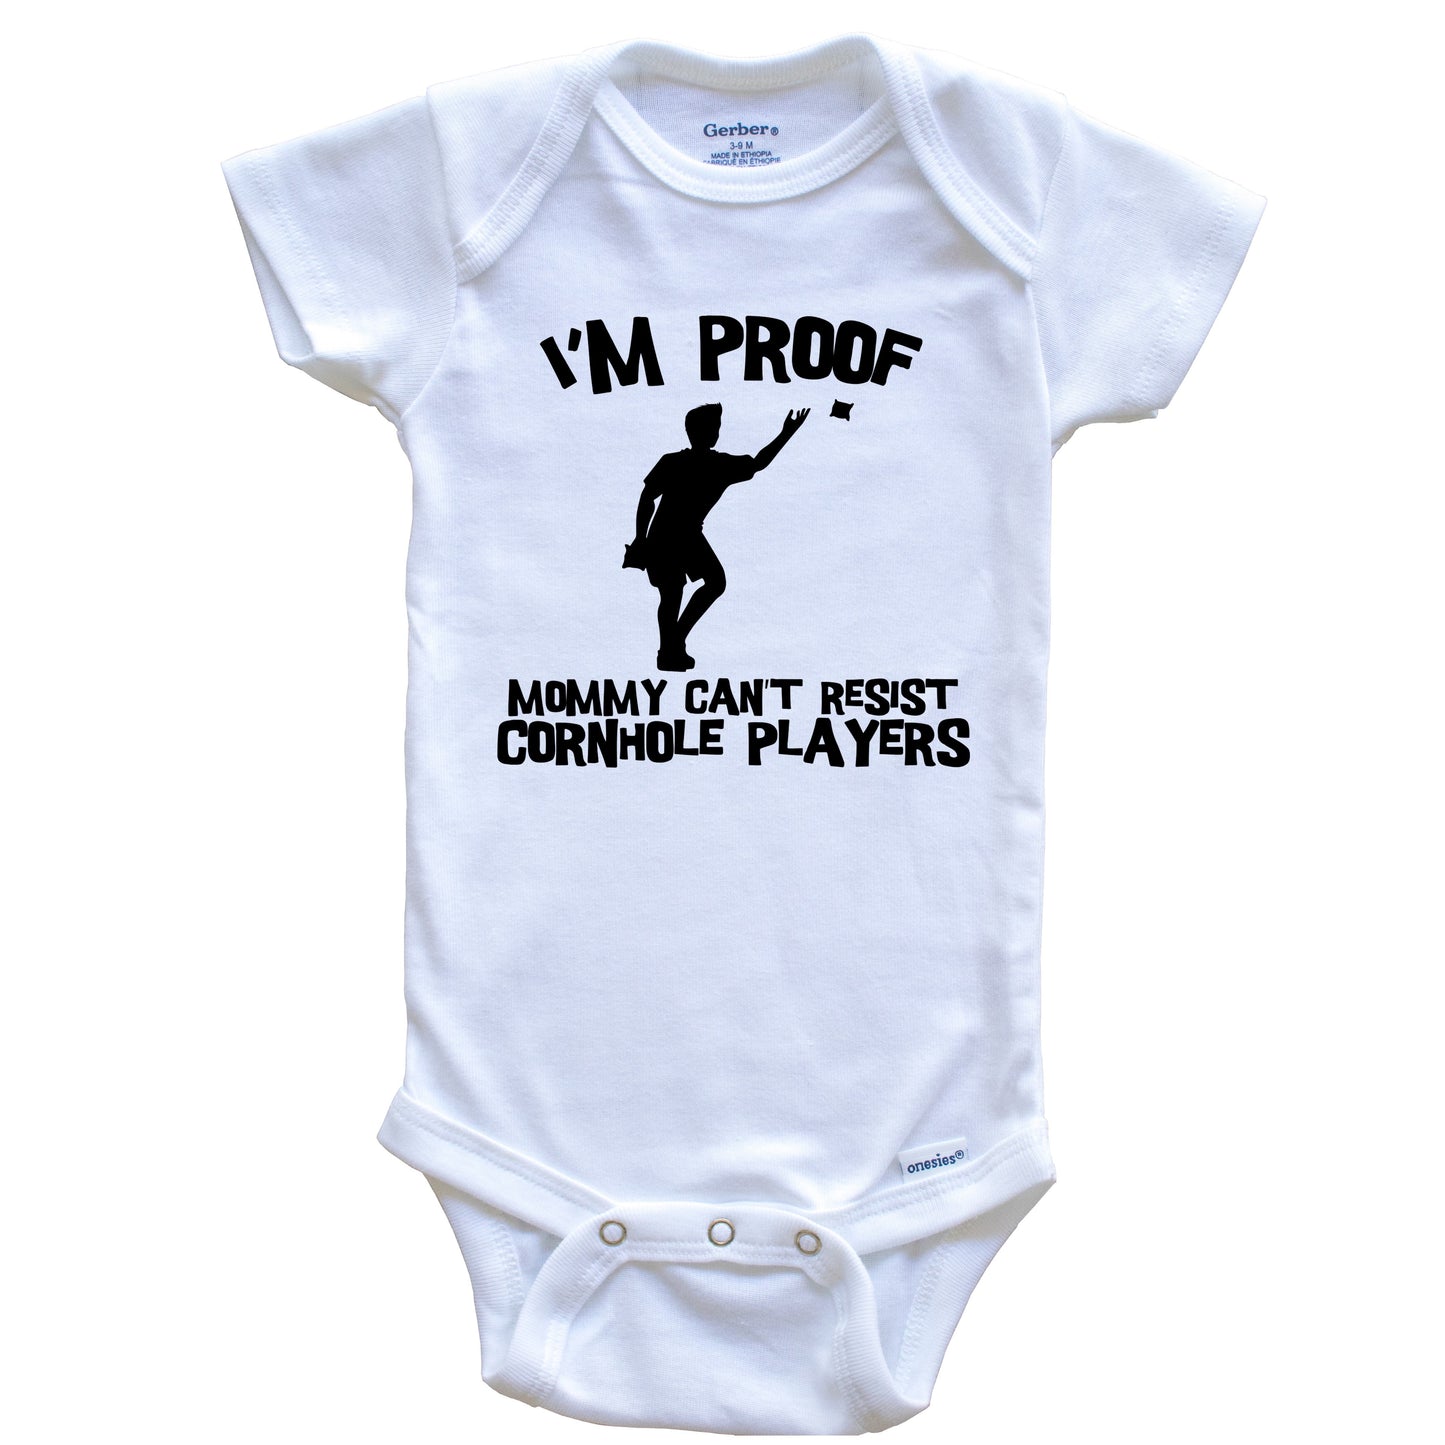 I'm Proof Mommy Can't Resist Cornhole Players Funny Cornhole Baby Onesie